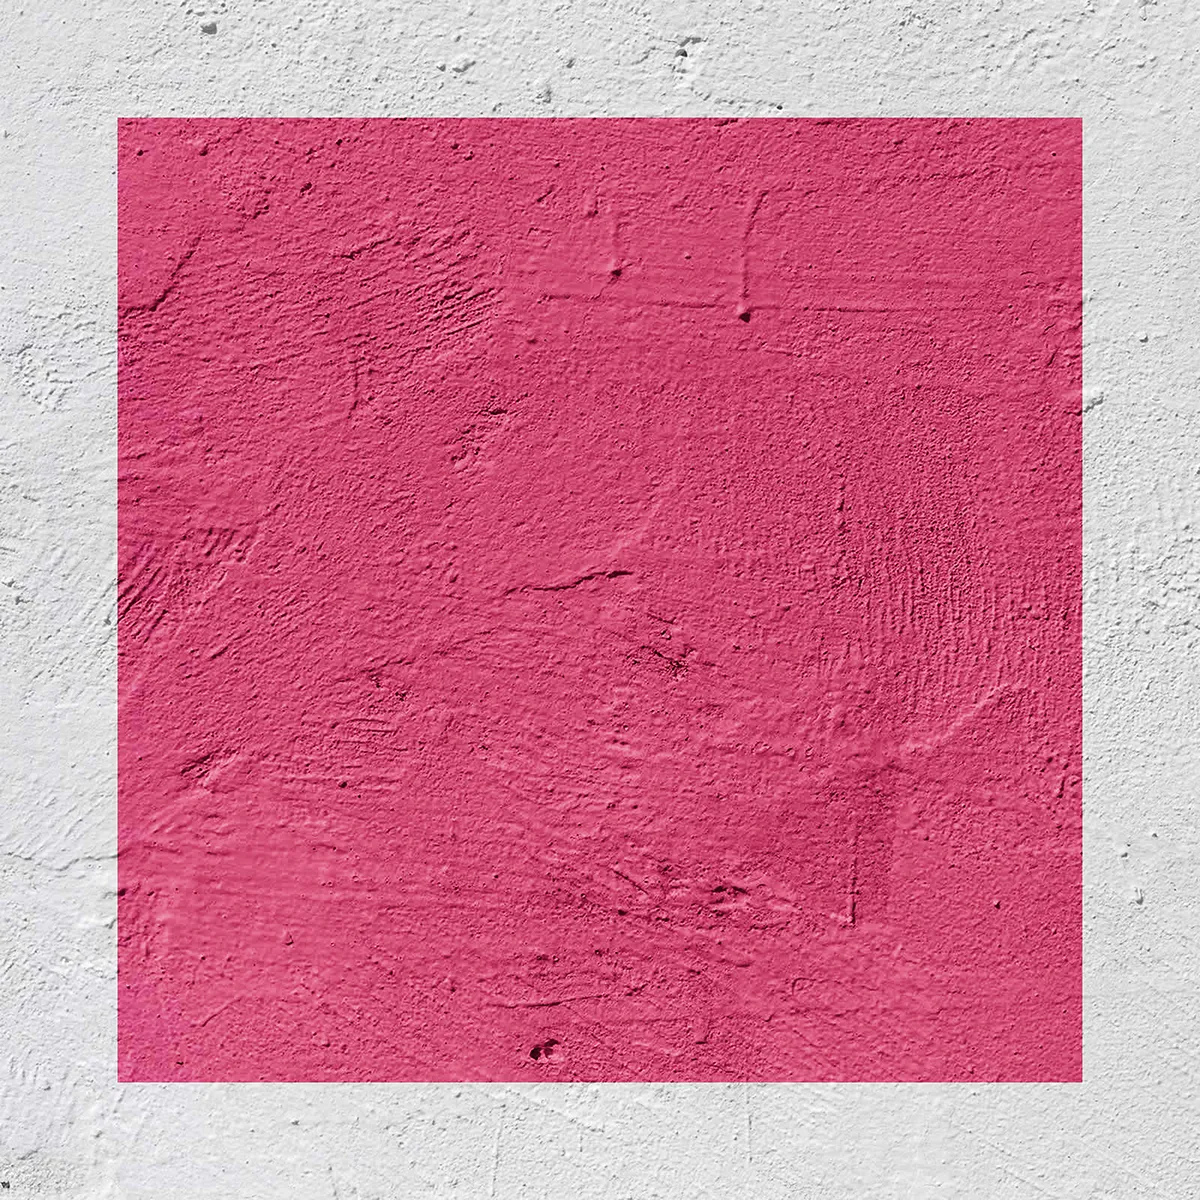 Print from contemporary artist Vladimir Tsesler - Malevich Pink Square. For sale.